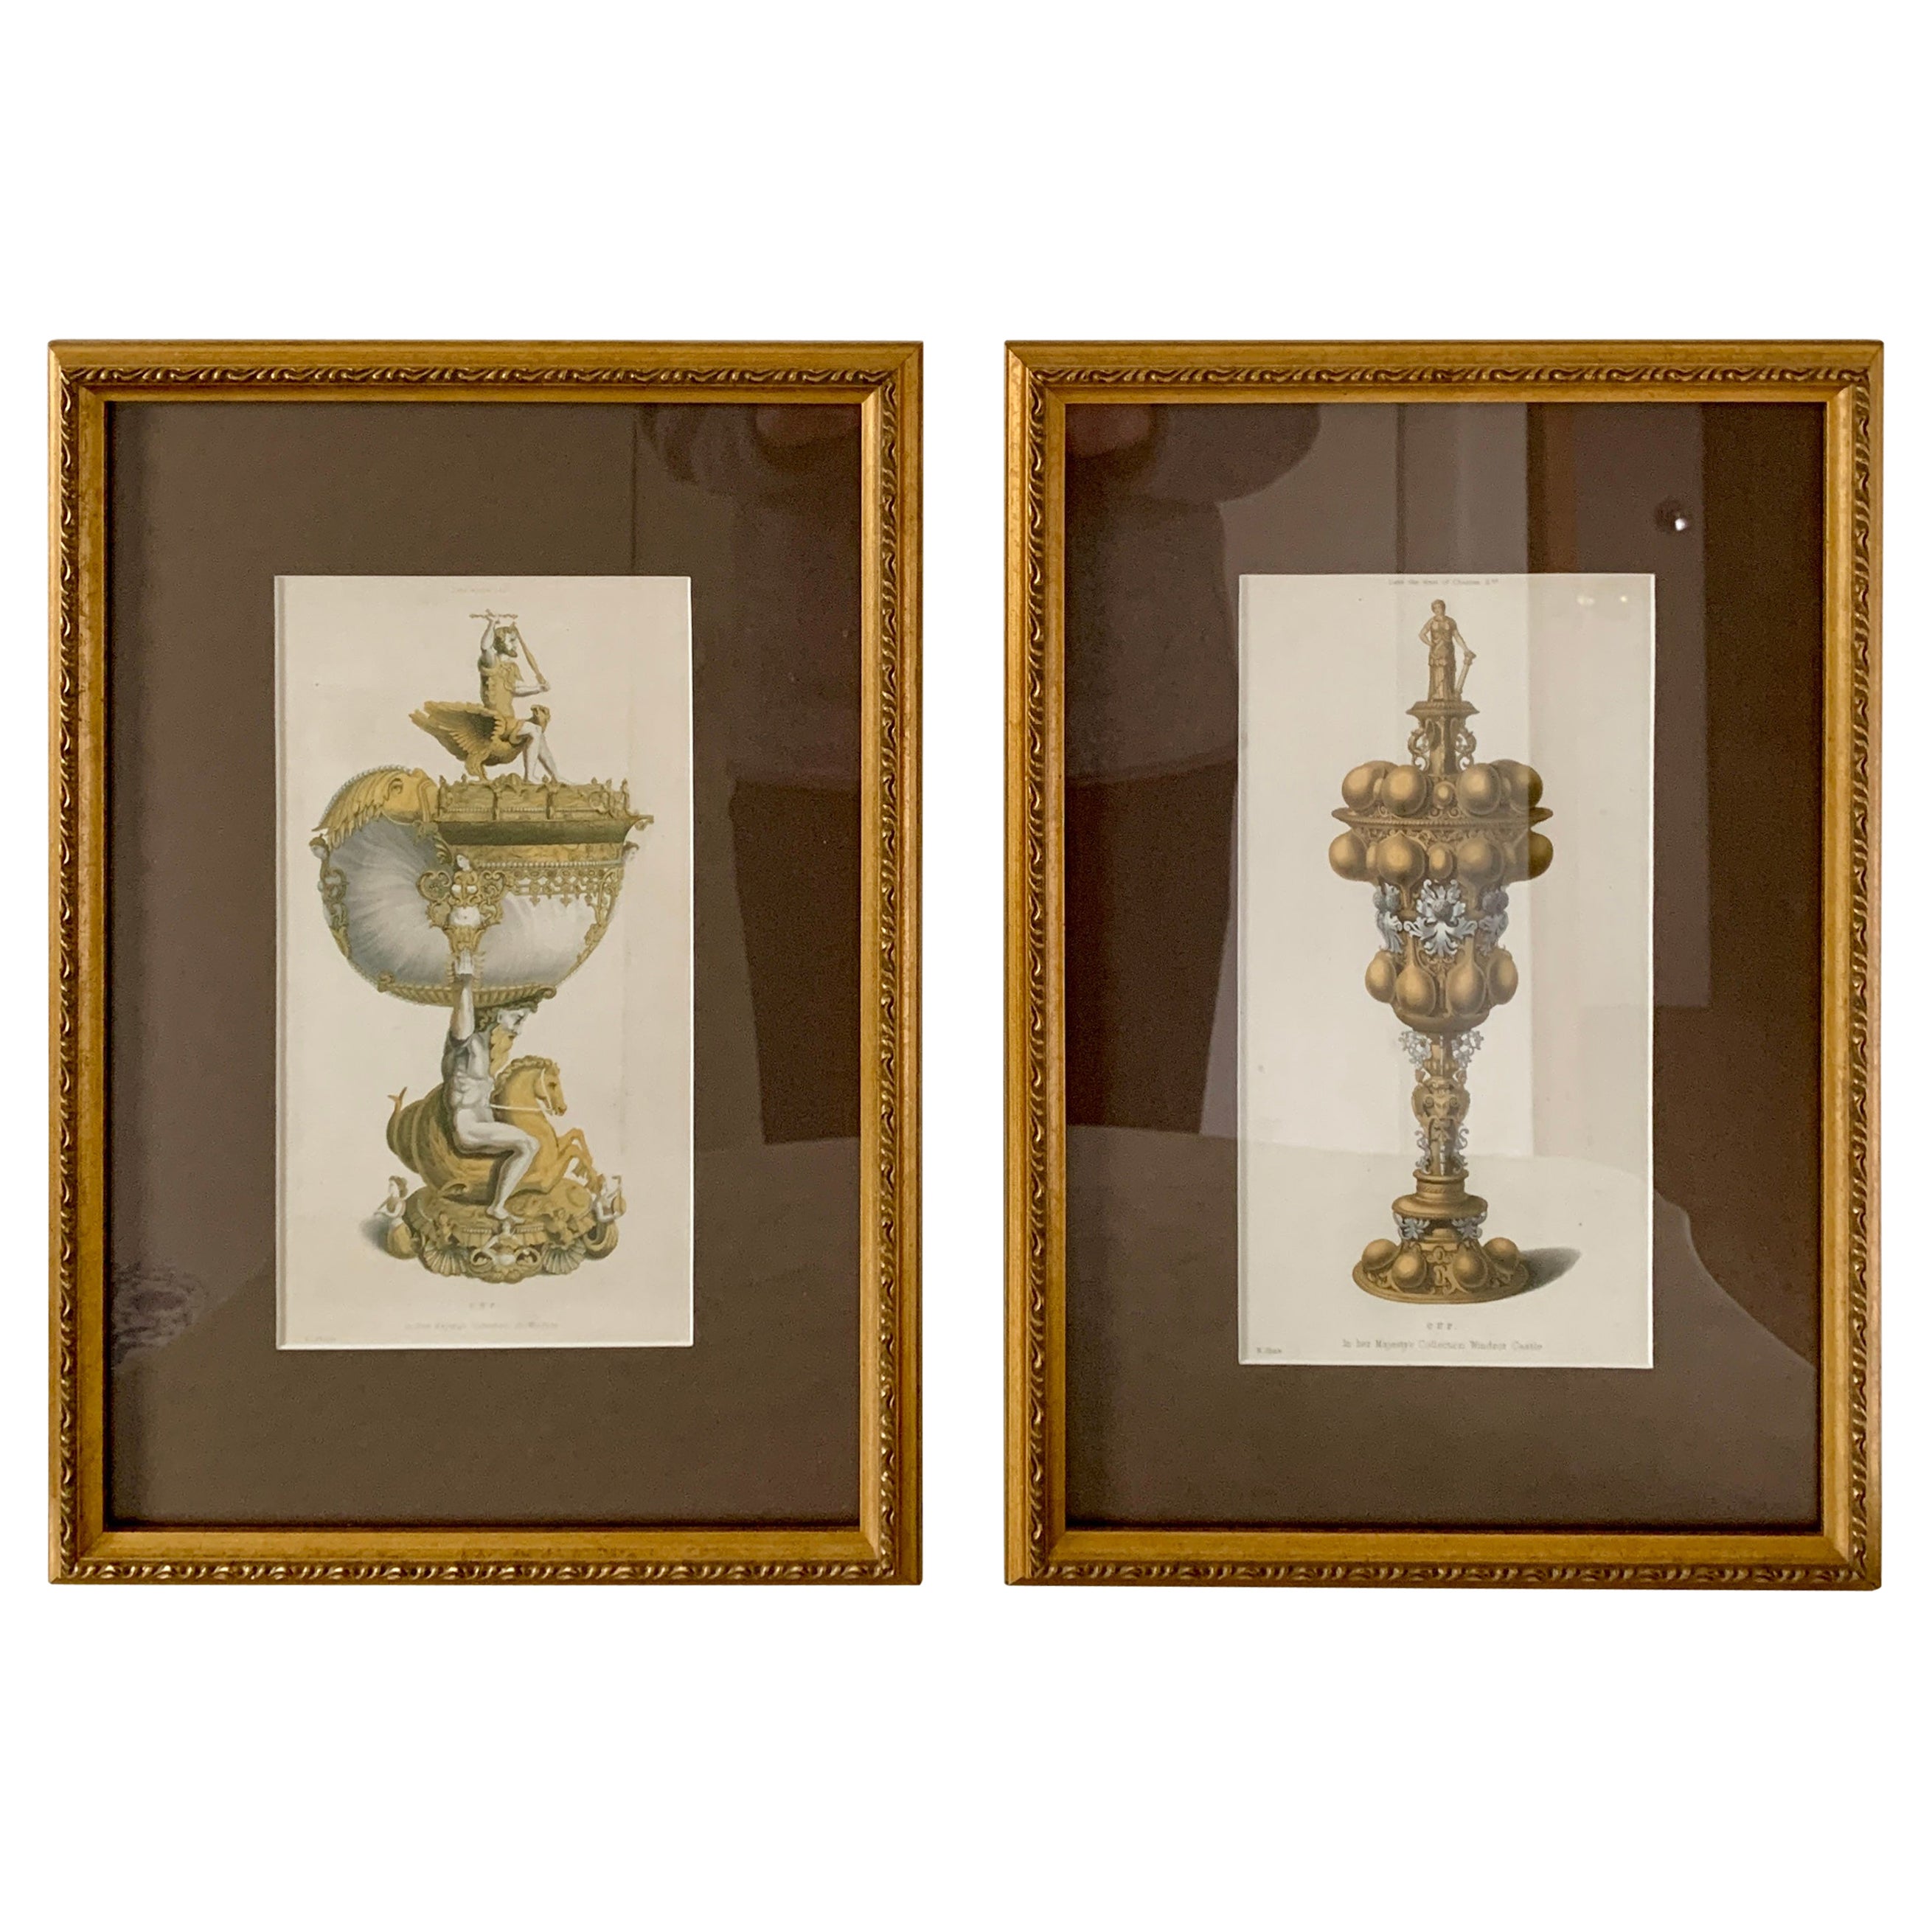 Framed Prints of Pieces in Her Majesty's Collection at Windsor by H. Shaw, Pair For Sale